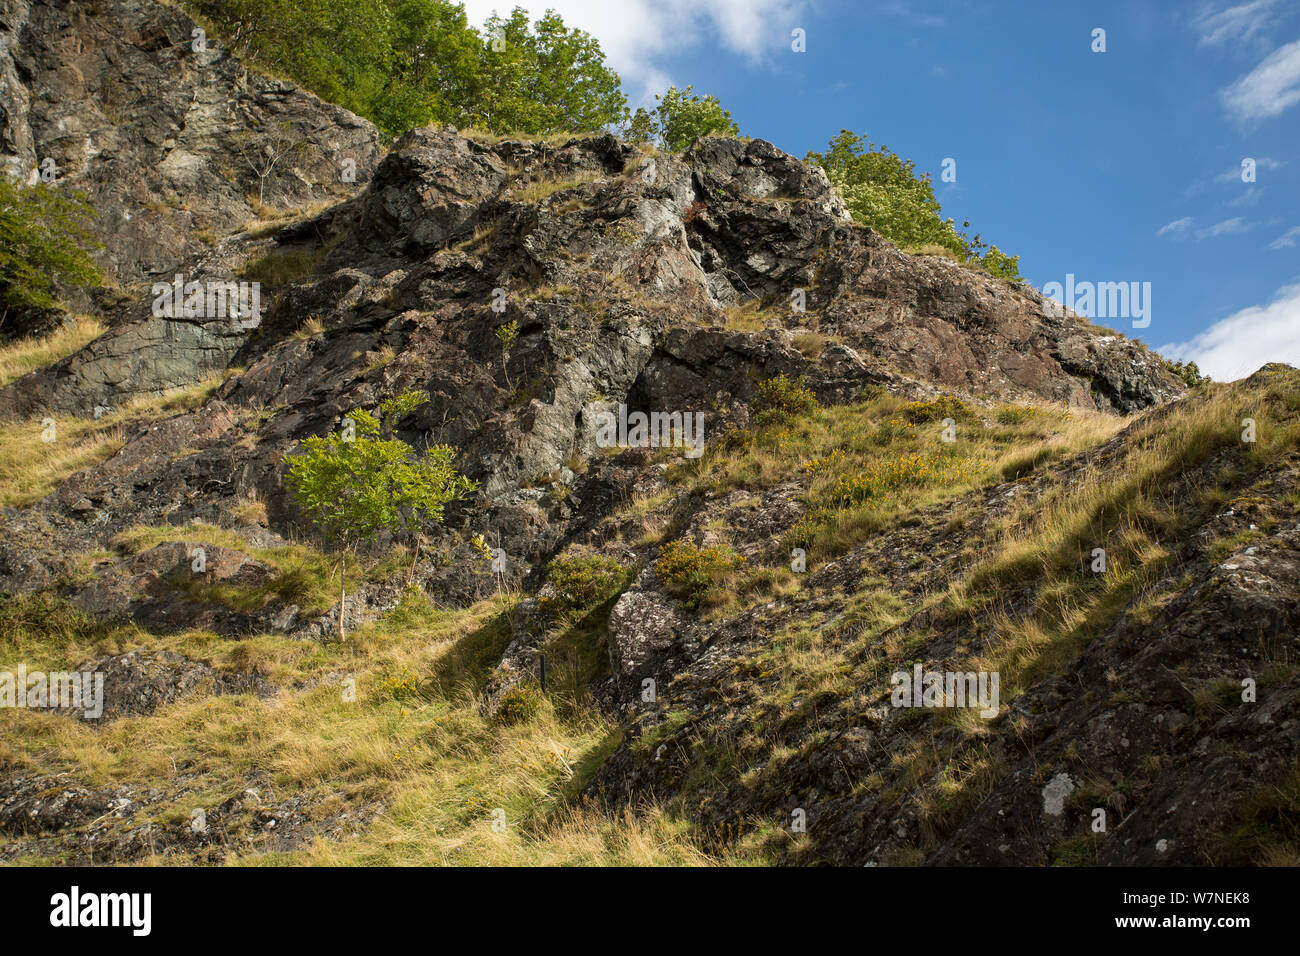 Igneous rock geology and vegetation. Stanner Rocks National Nature Reserve, Powys, Wales, UK. Stock Photo